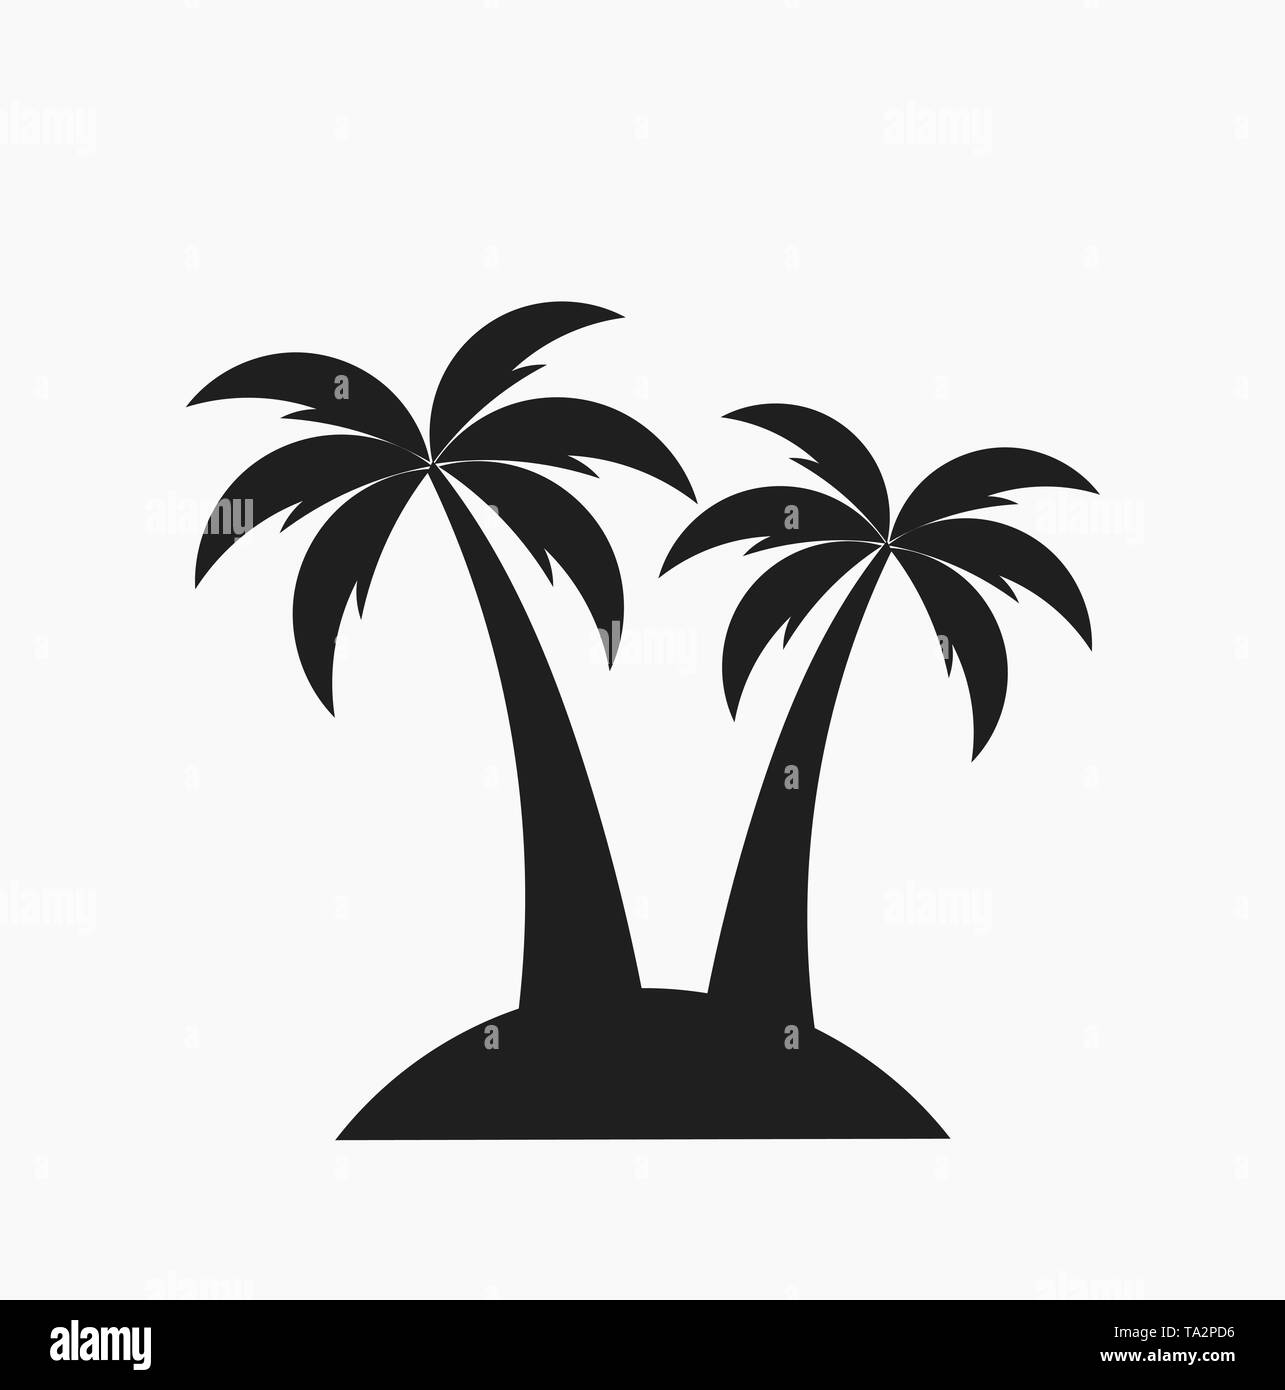 Two palm trees on island. Vector illustration Stock Vector Image